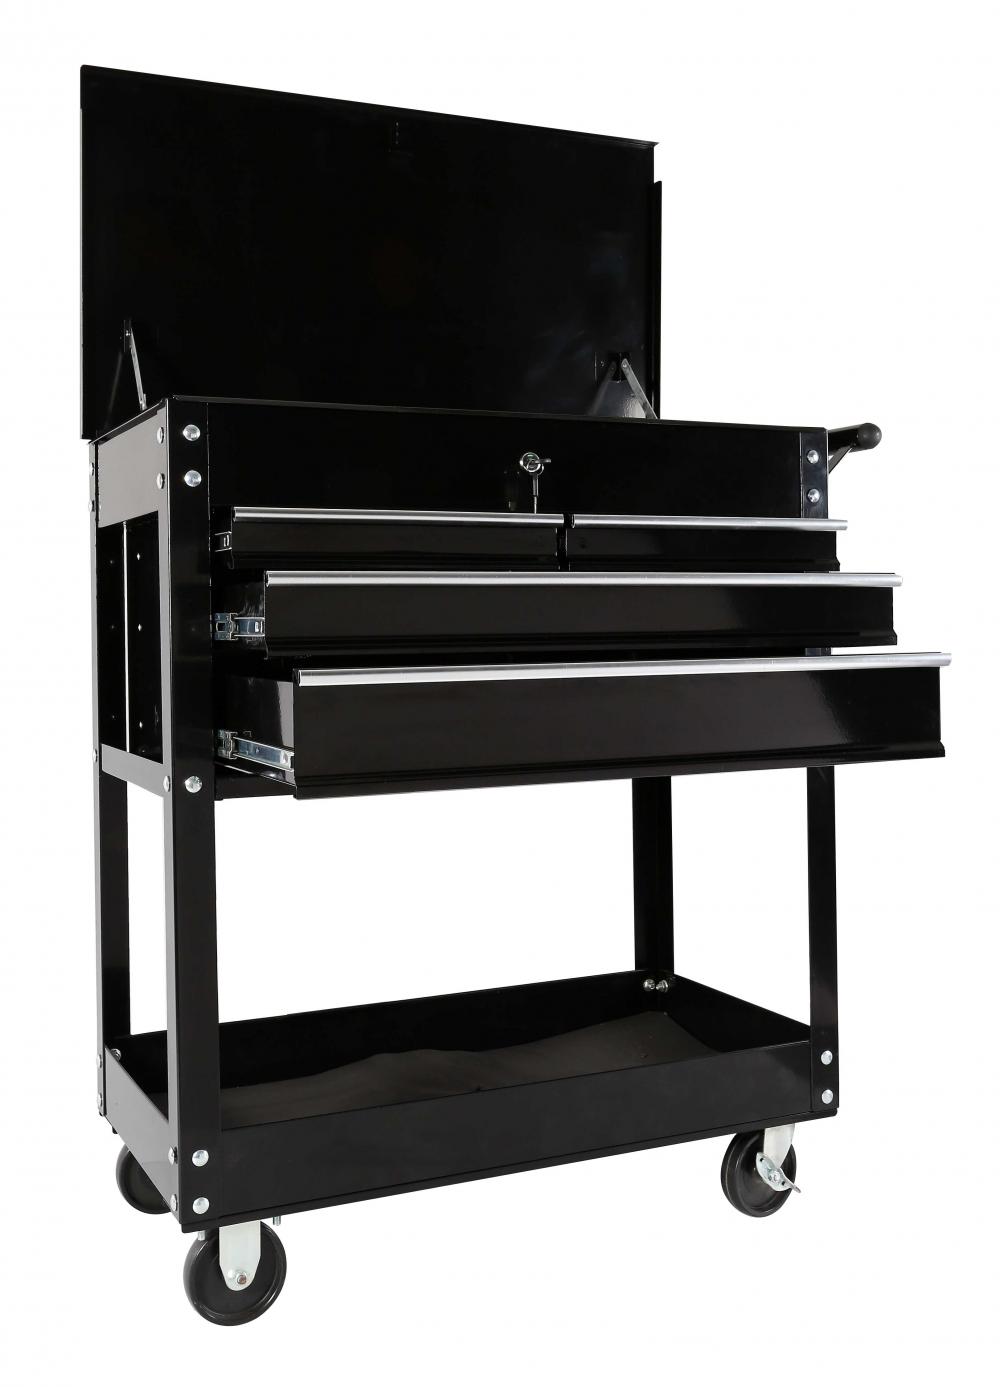 30"tool cart with lockable drawers